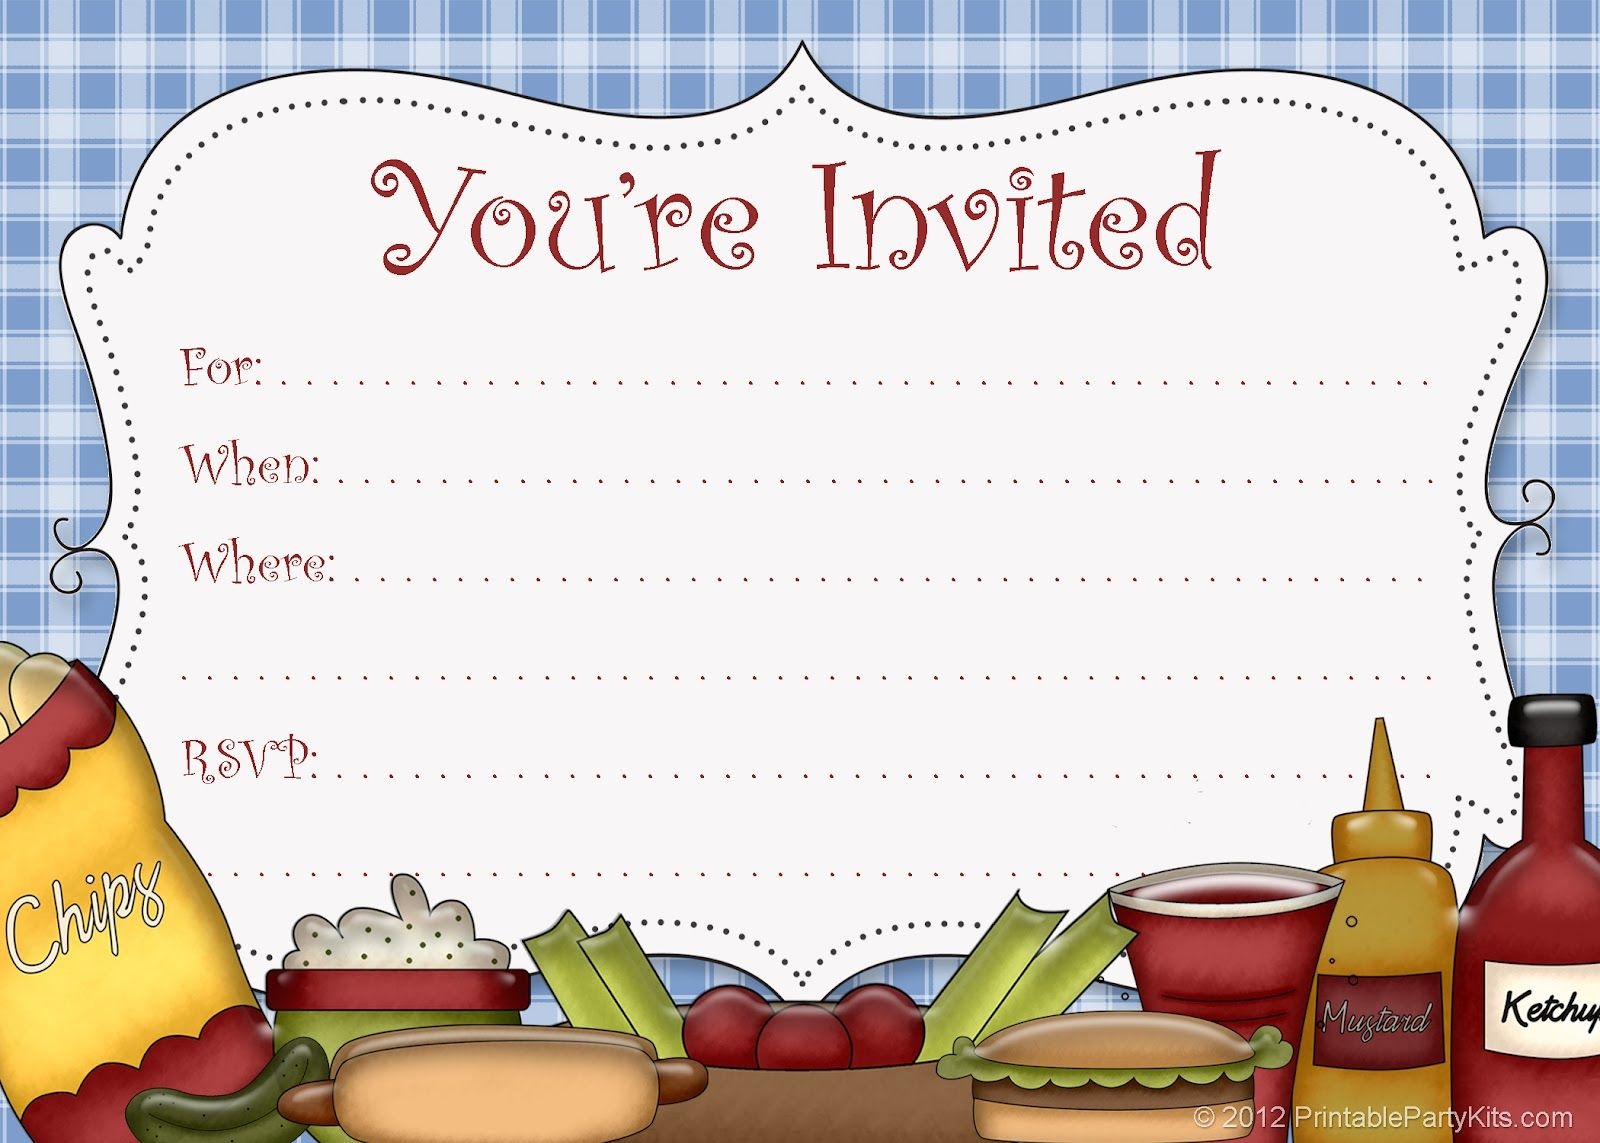 5 Best Images Of Free Printable Cookout Invitations | Party Things - Free Printable Cookout Invitations